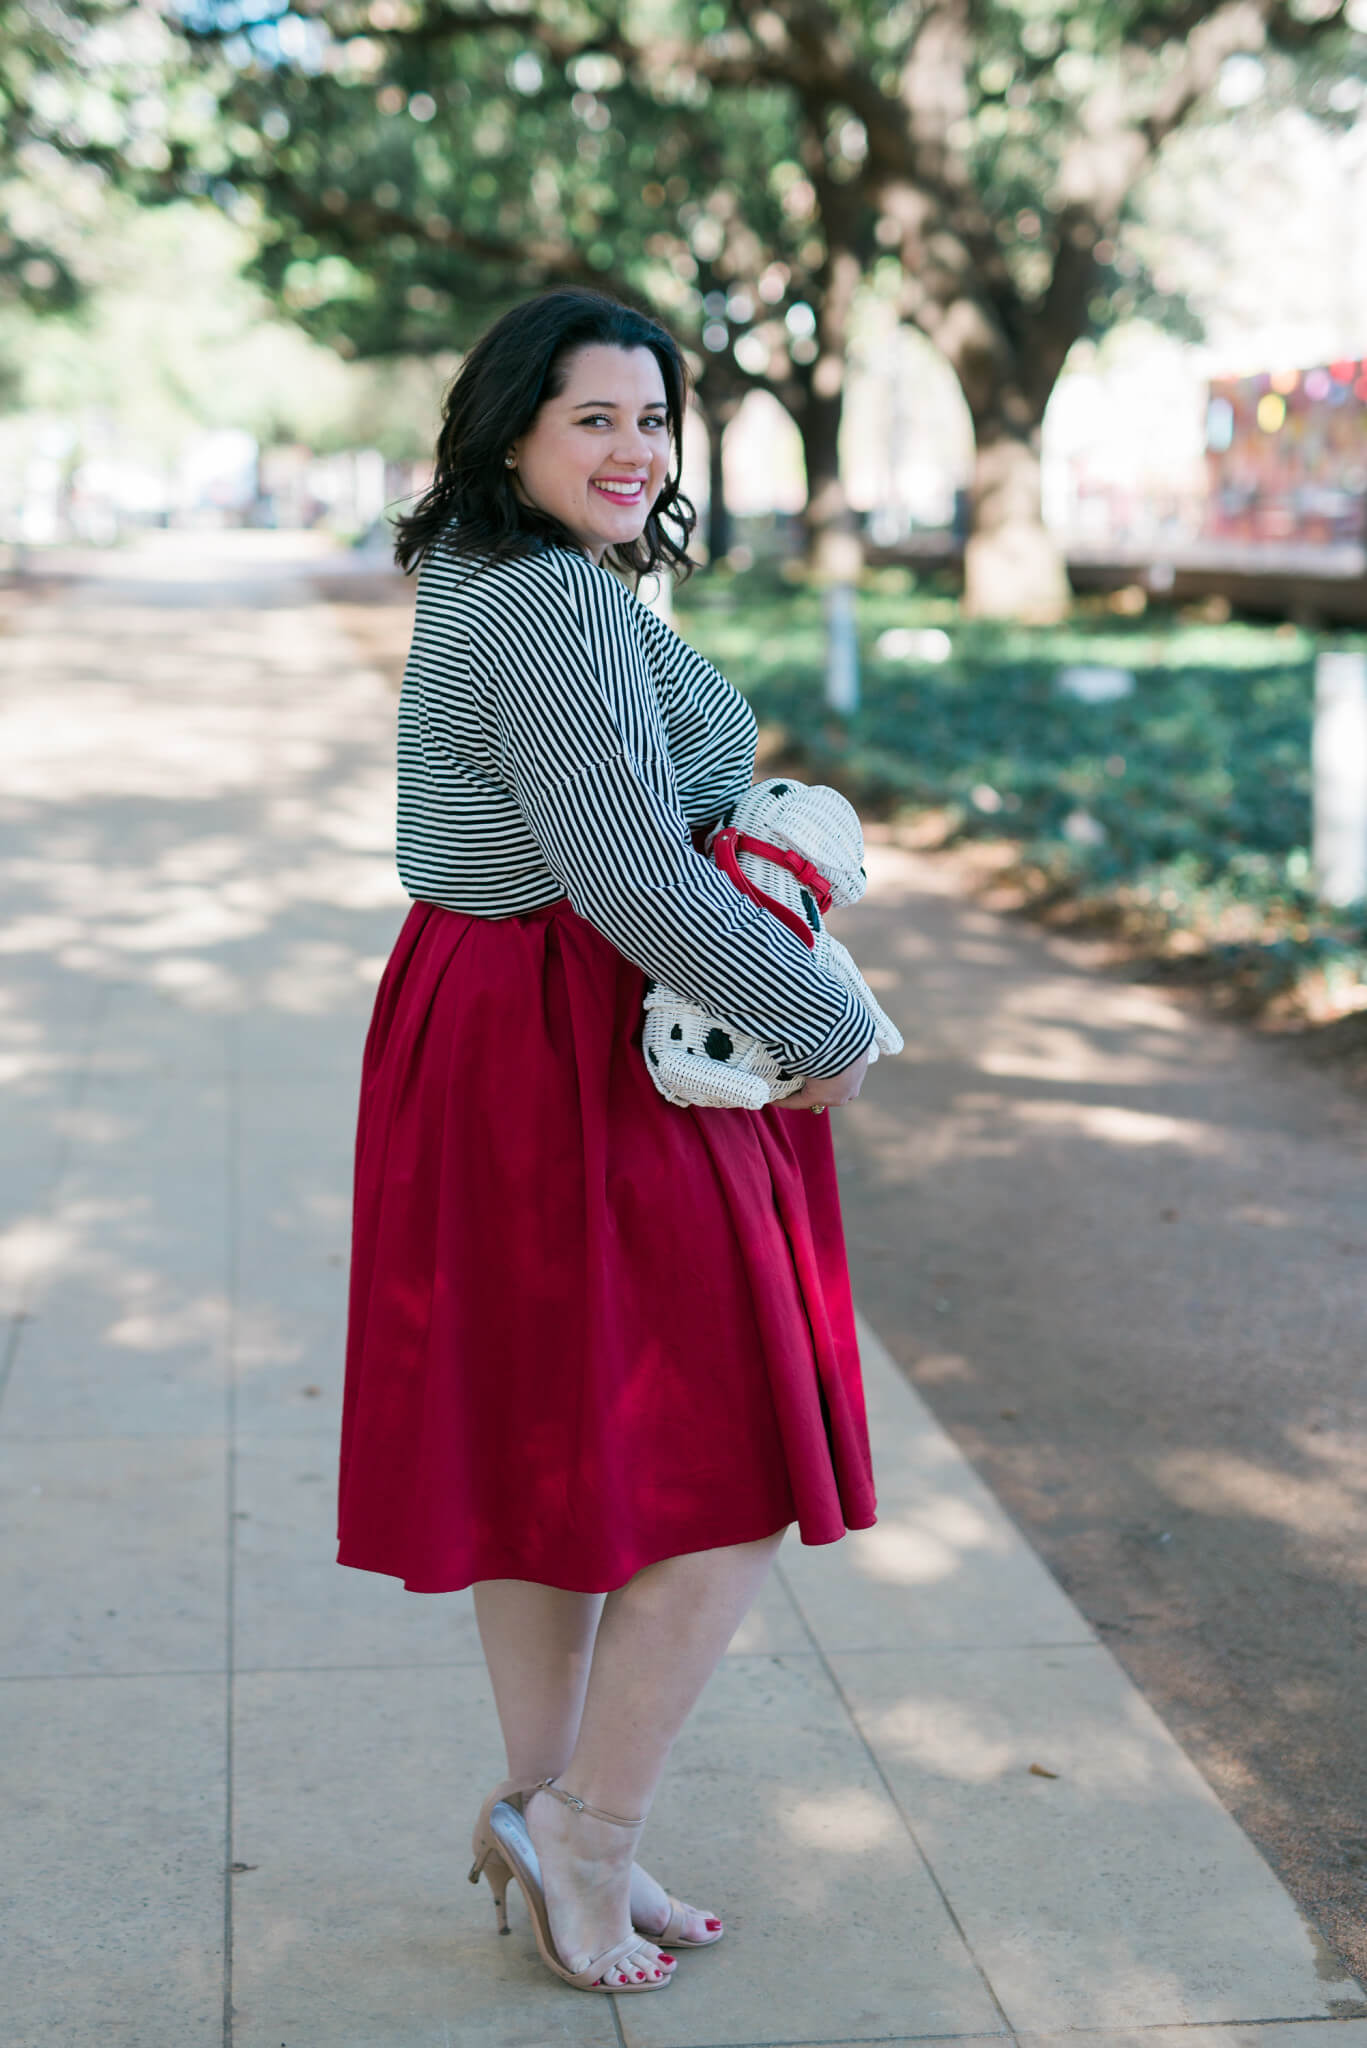 Puppy Love - Something Gold, Something Blue fashion blog - Want to elevate a stripped top and red skirt, add a statement bag